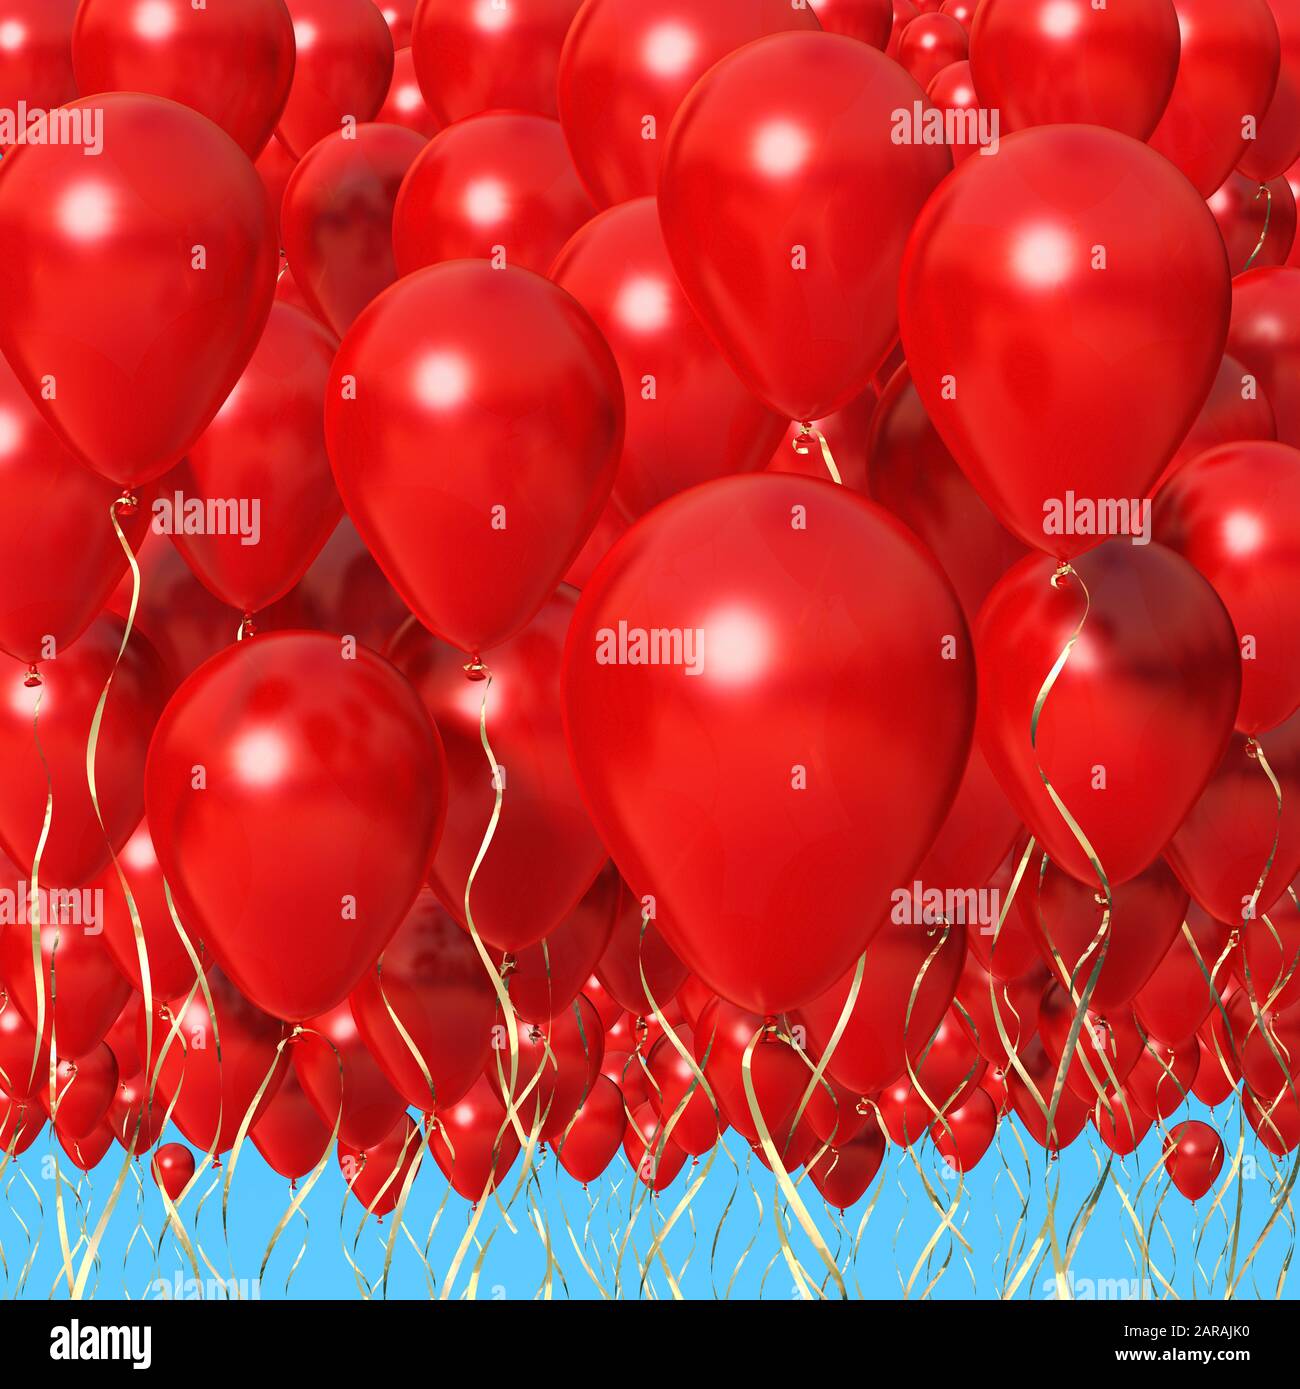 Red Balloons Images